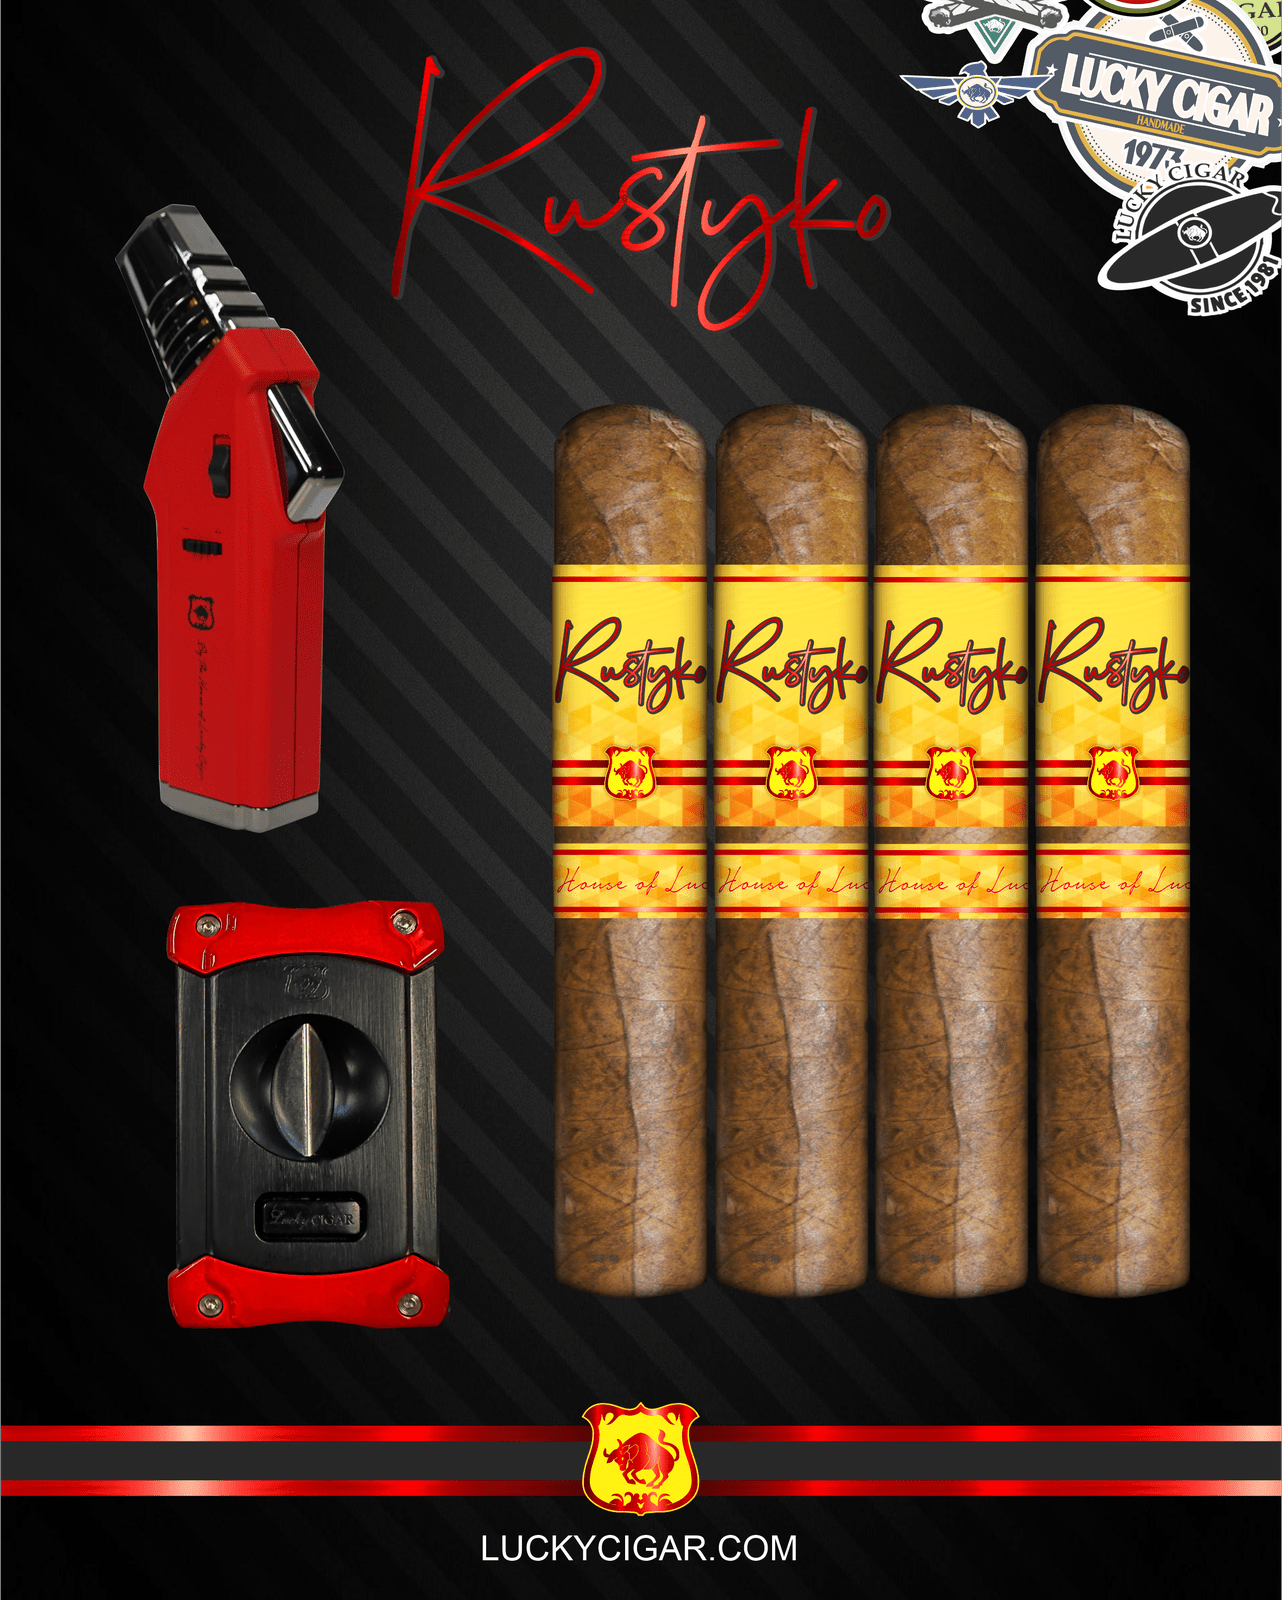 Infused Cigars: Rustyko Robusto 5x54 Cigars - Set of 4 with Torch, Cutter